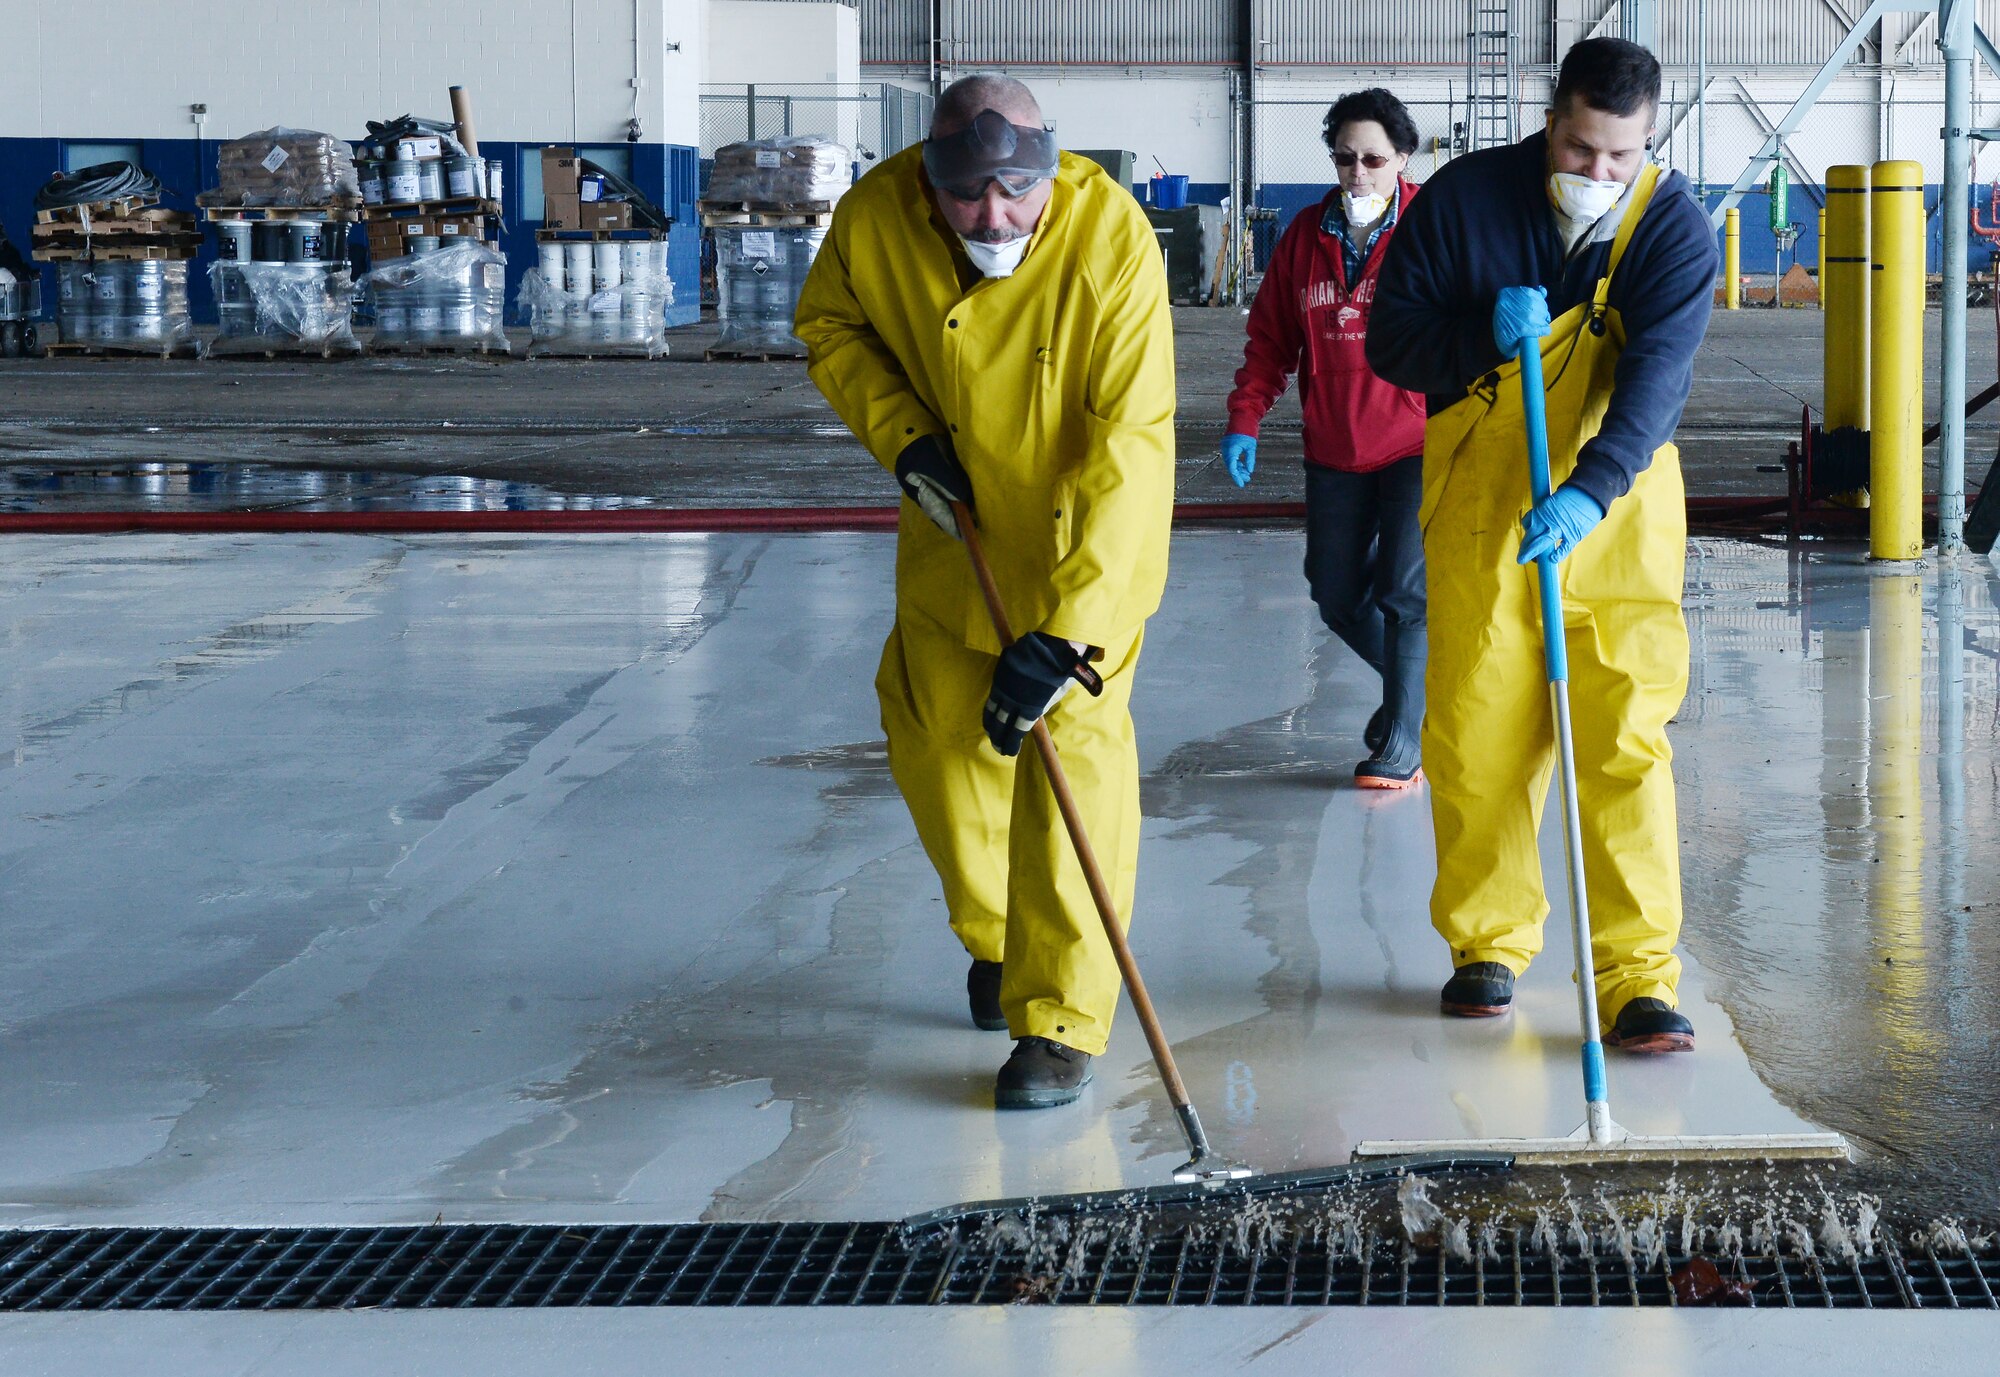 Team Offutt members clear debris from one of the docks at the Bennie L. Davis Maintenance Facility on March 21, 2019. Team Offutt personnel have regained access to buildings and facilities to begin assessing damage and recovering items which were underwater less than a week ago (Photo by Charles Haymond).